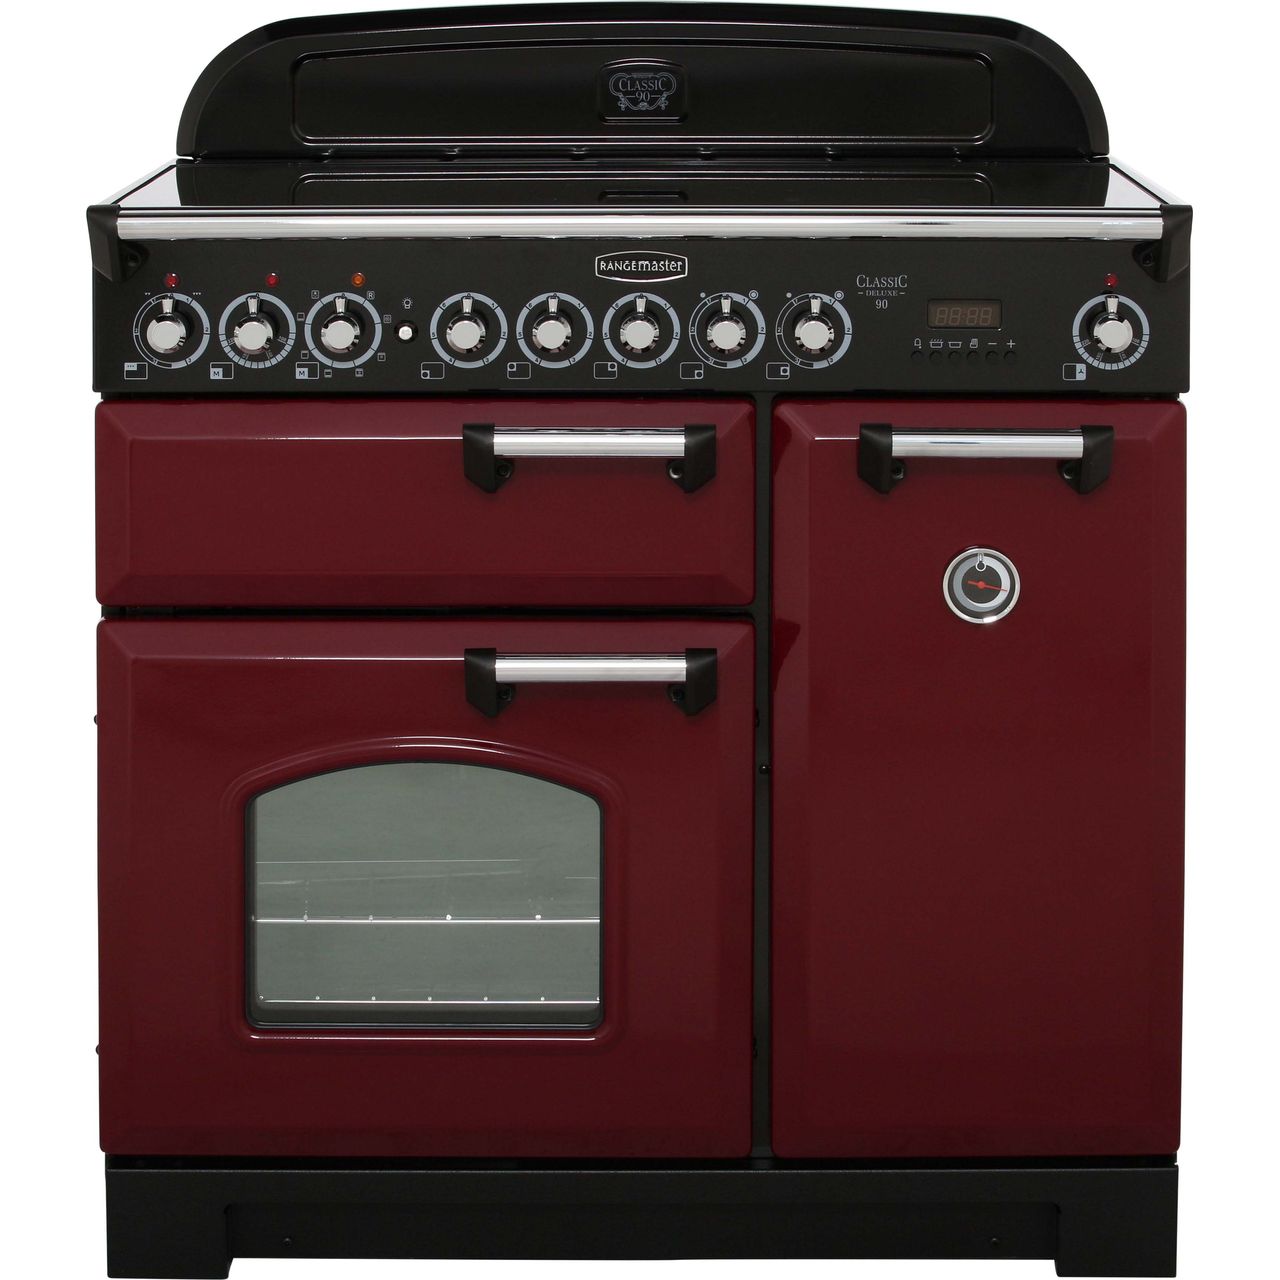 Rangemaster Classic Deluxe CDL90ECSL/B 90cm Electric Range Cooker with Ceramic Hob - Slate Grey / Brass - A/A Rated, Grey